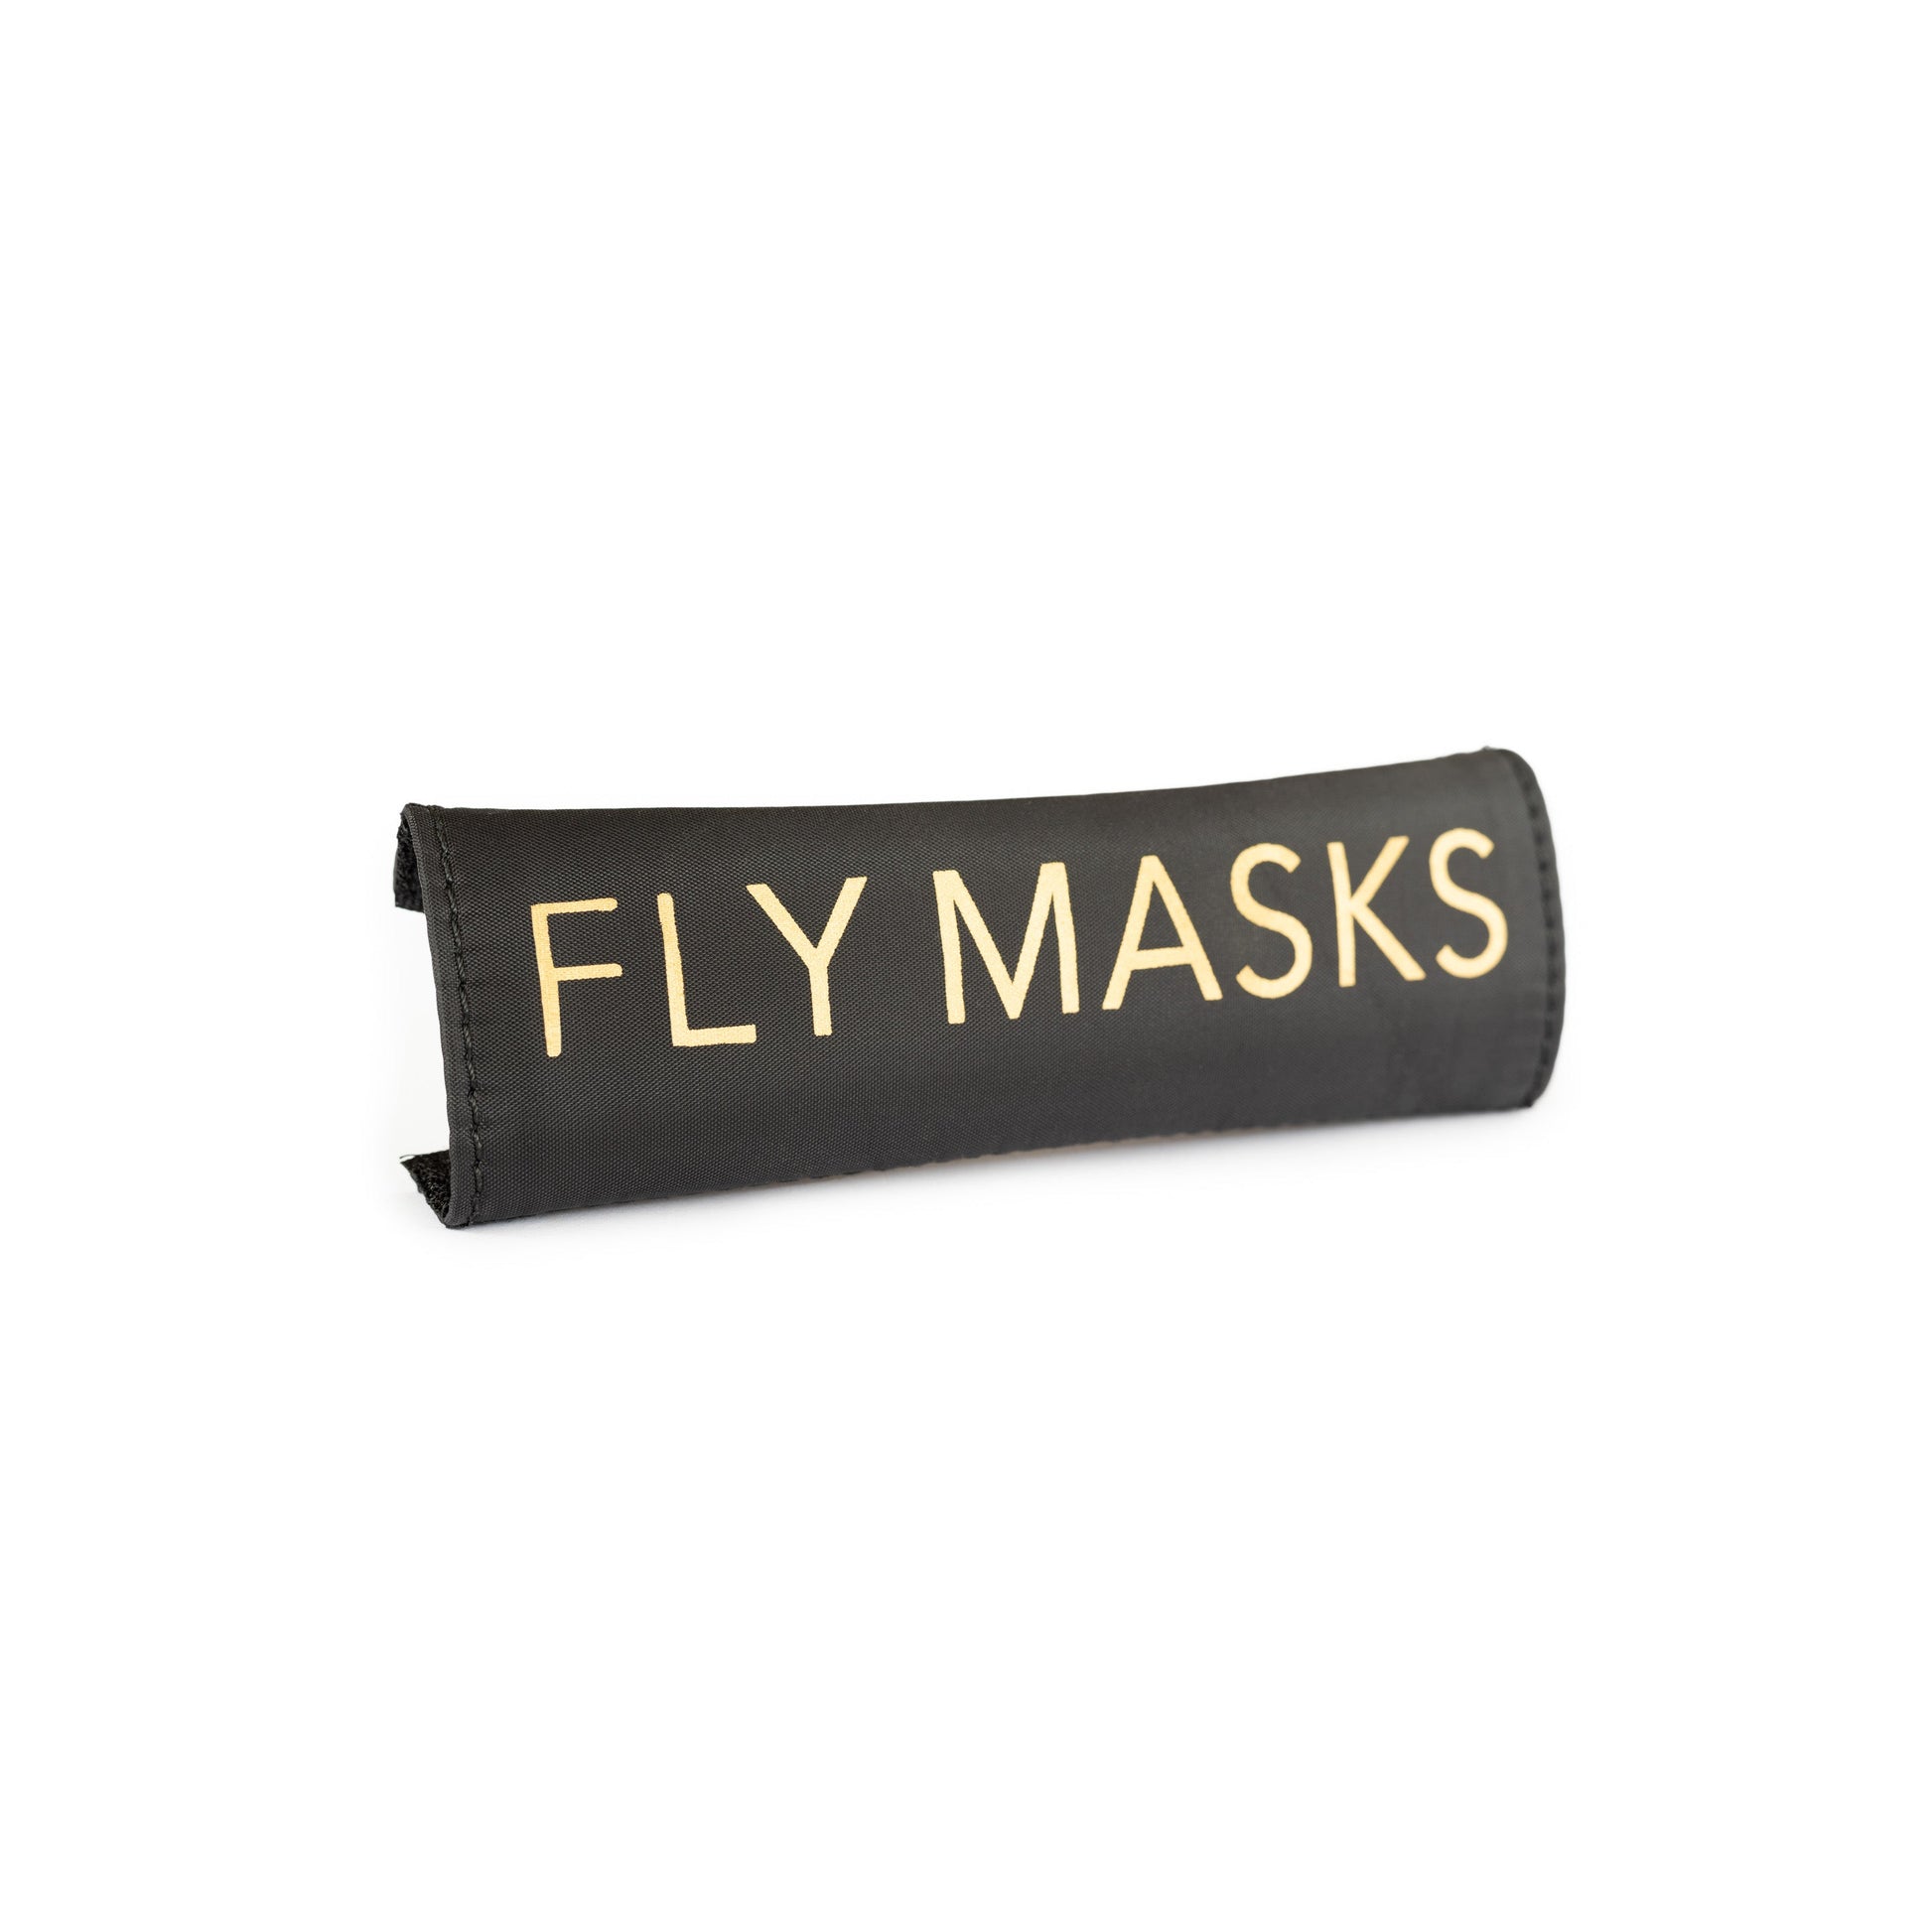 Label that reads "Fly Masks"